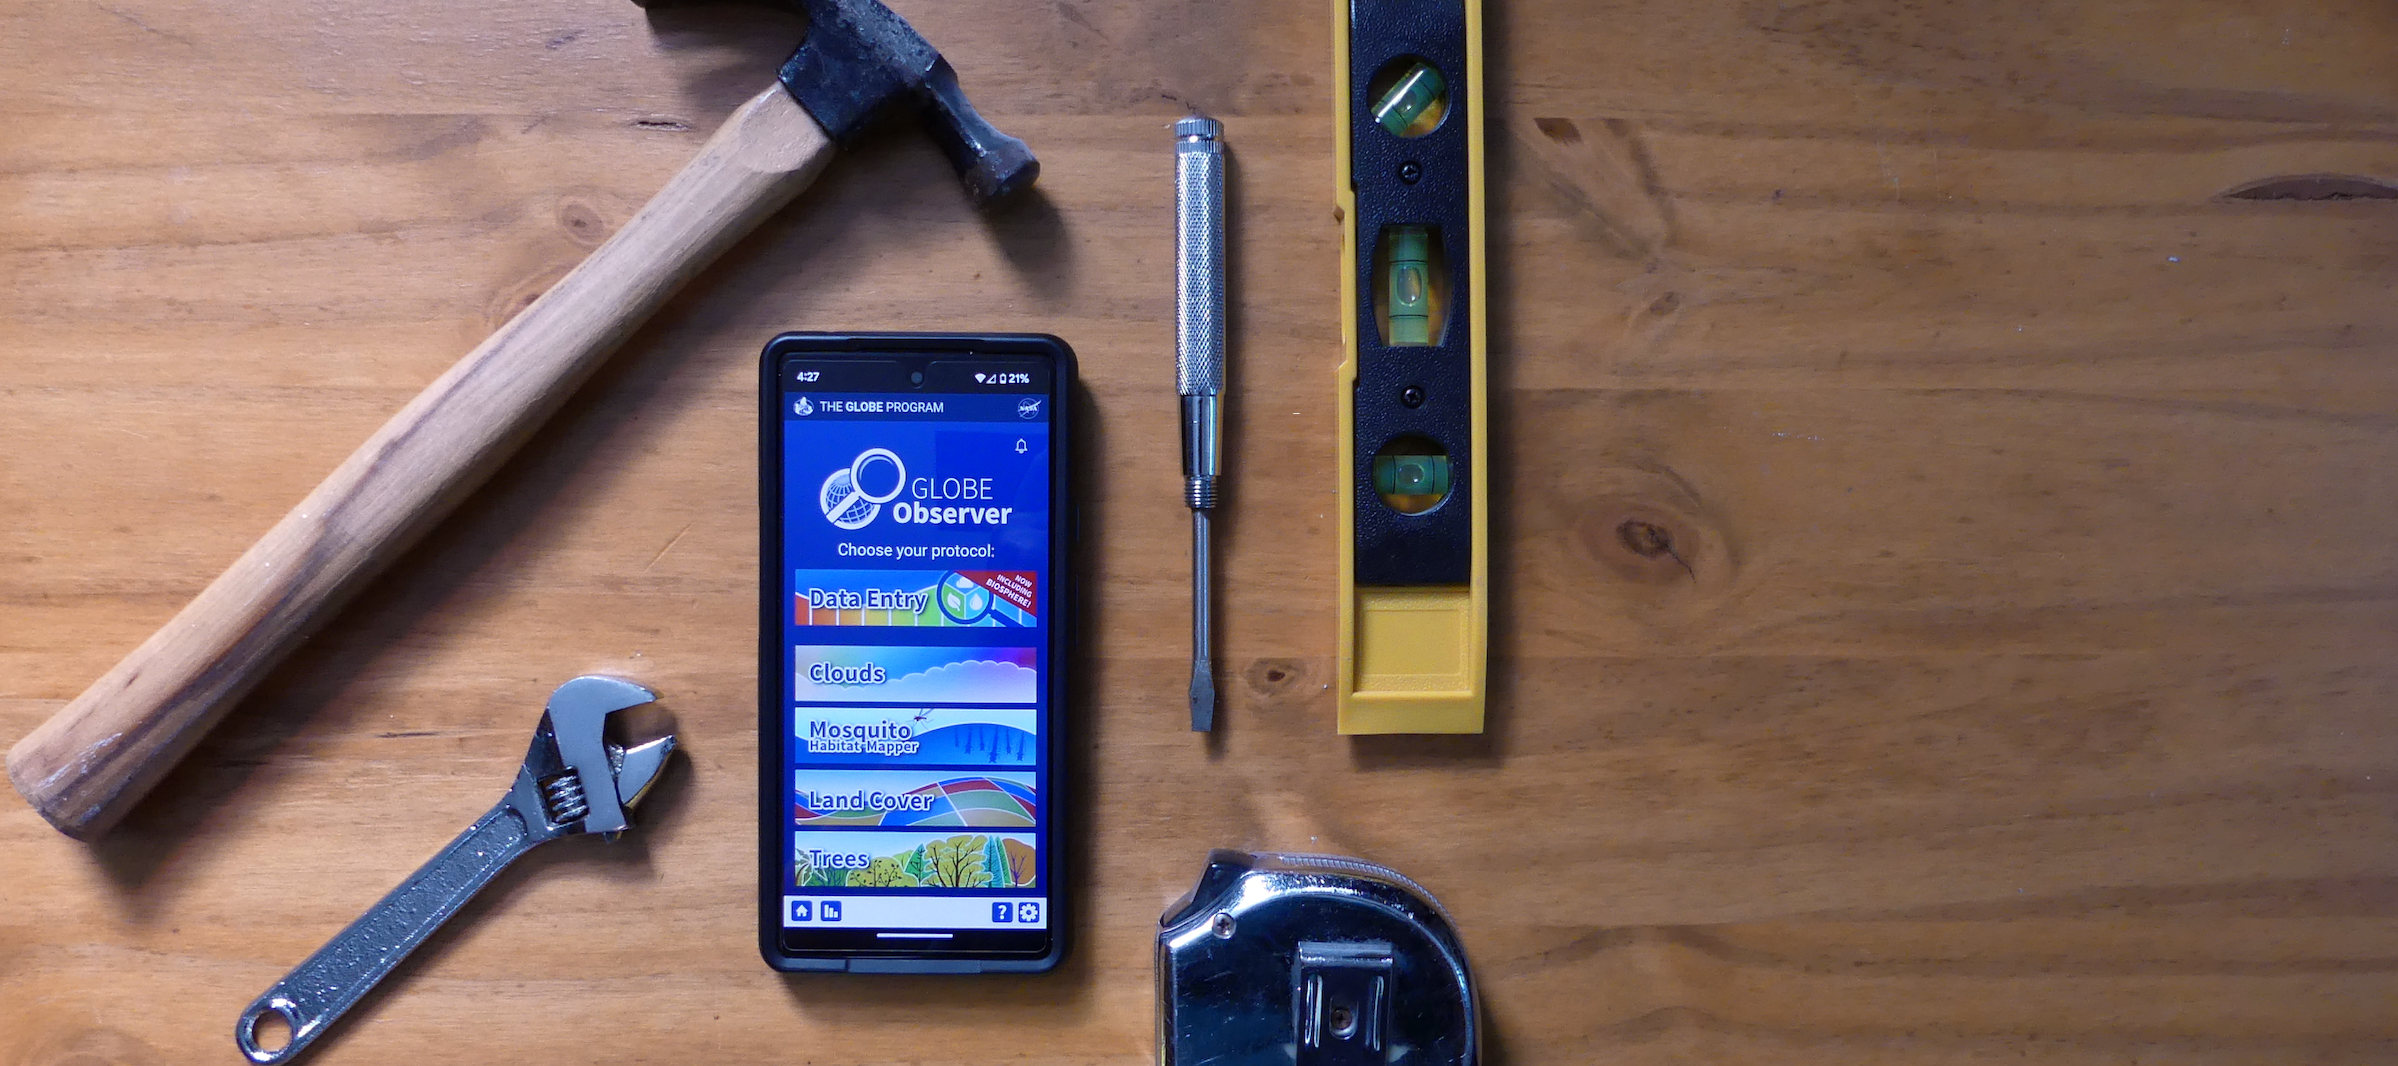 Various tools, a hammer, wrench, screwdriver, tape measure, and level, surrounding a phone with the screen showing the GLOBE Observer app.